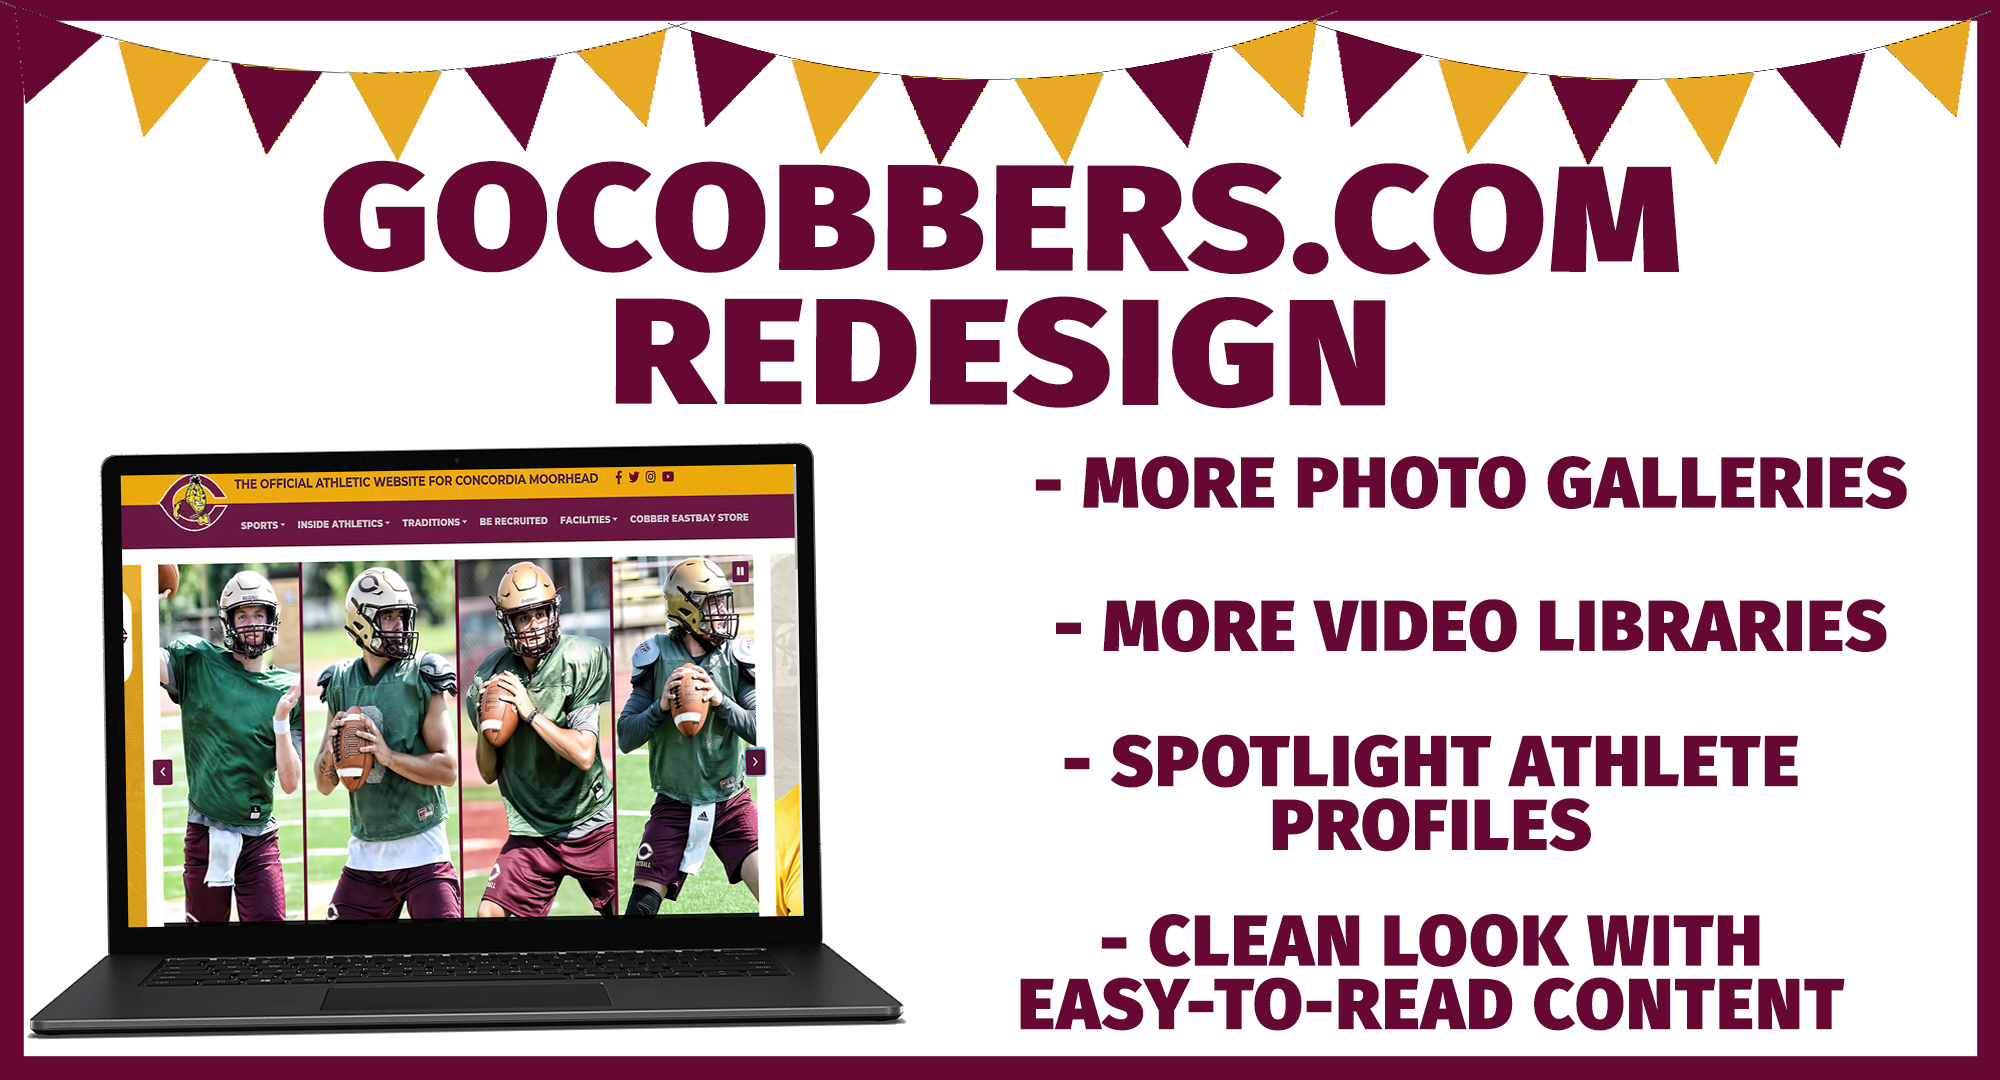 Welcome to the new redesigned Cobber Athletics website! The new site will have many features to keep fans up-to-date on all your favorite teams and student-athletes.